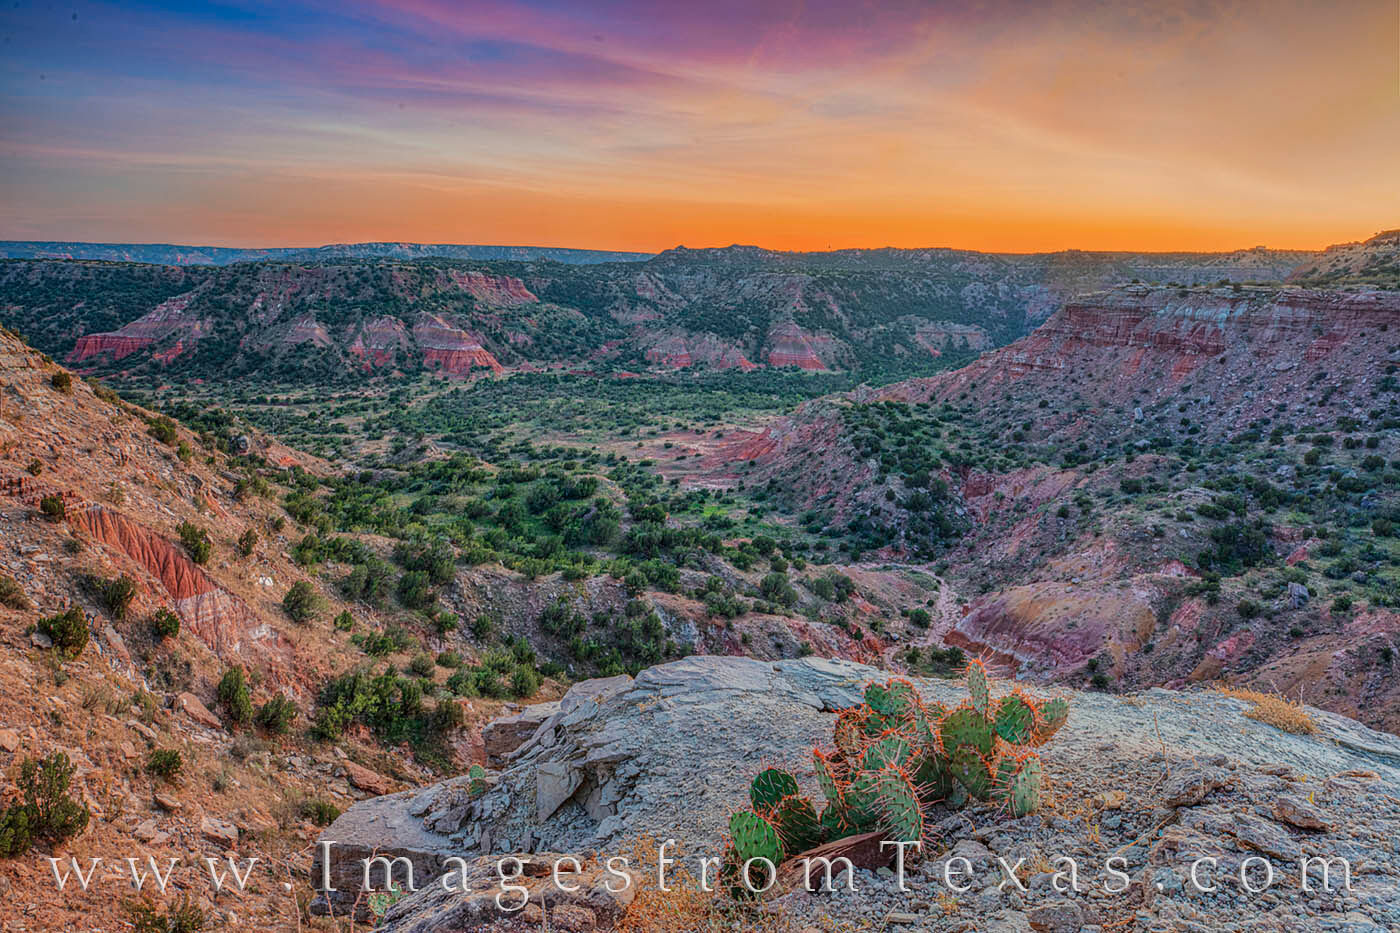 From a cliff’s edge along the CCC trail in Palo Duro Canyon, the sunset was gorgeous on this warm September evening. The prickly...